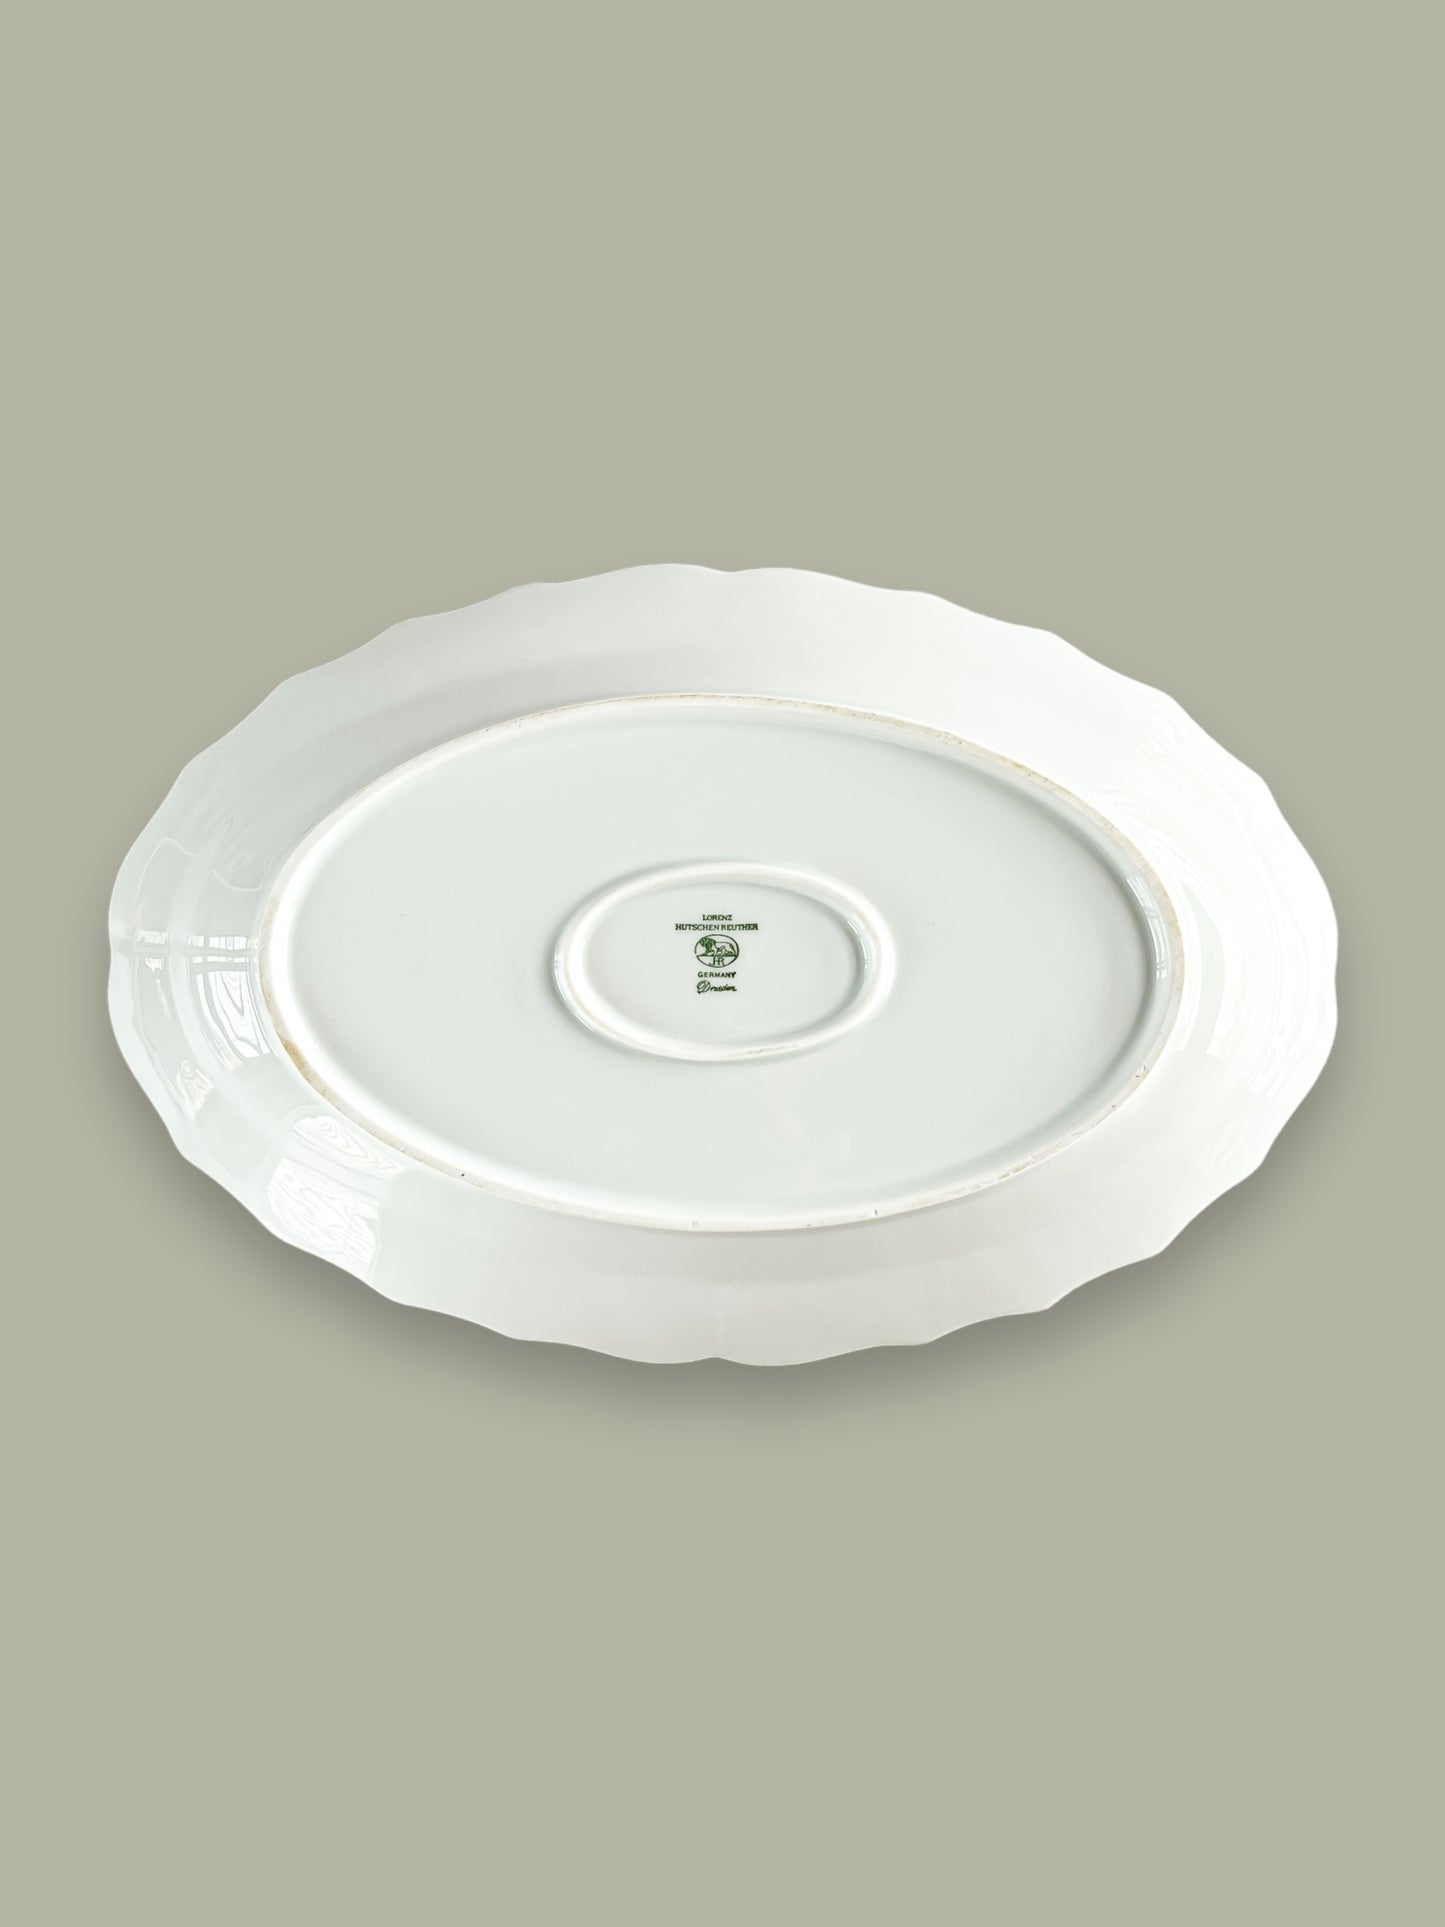 Hutschenreuther 38cm Oval Serving Platter - ‘Dresden’ Collection in All White